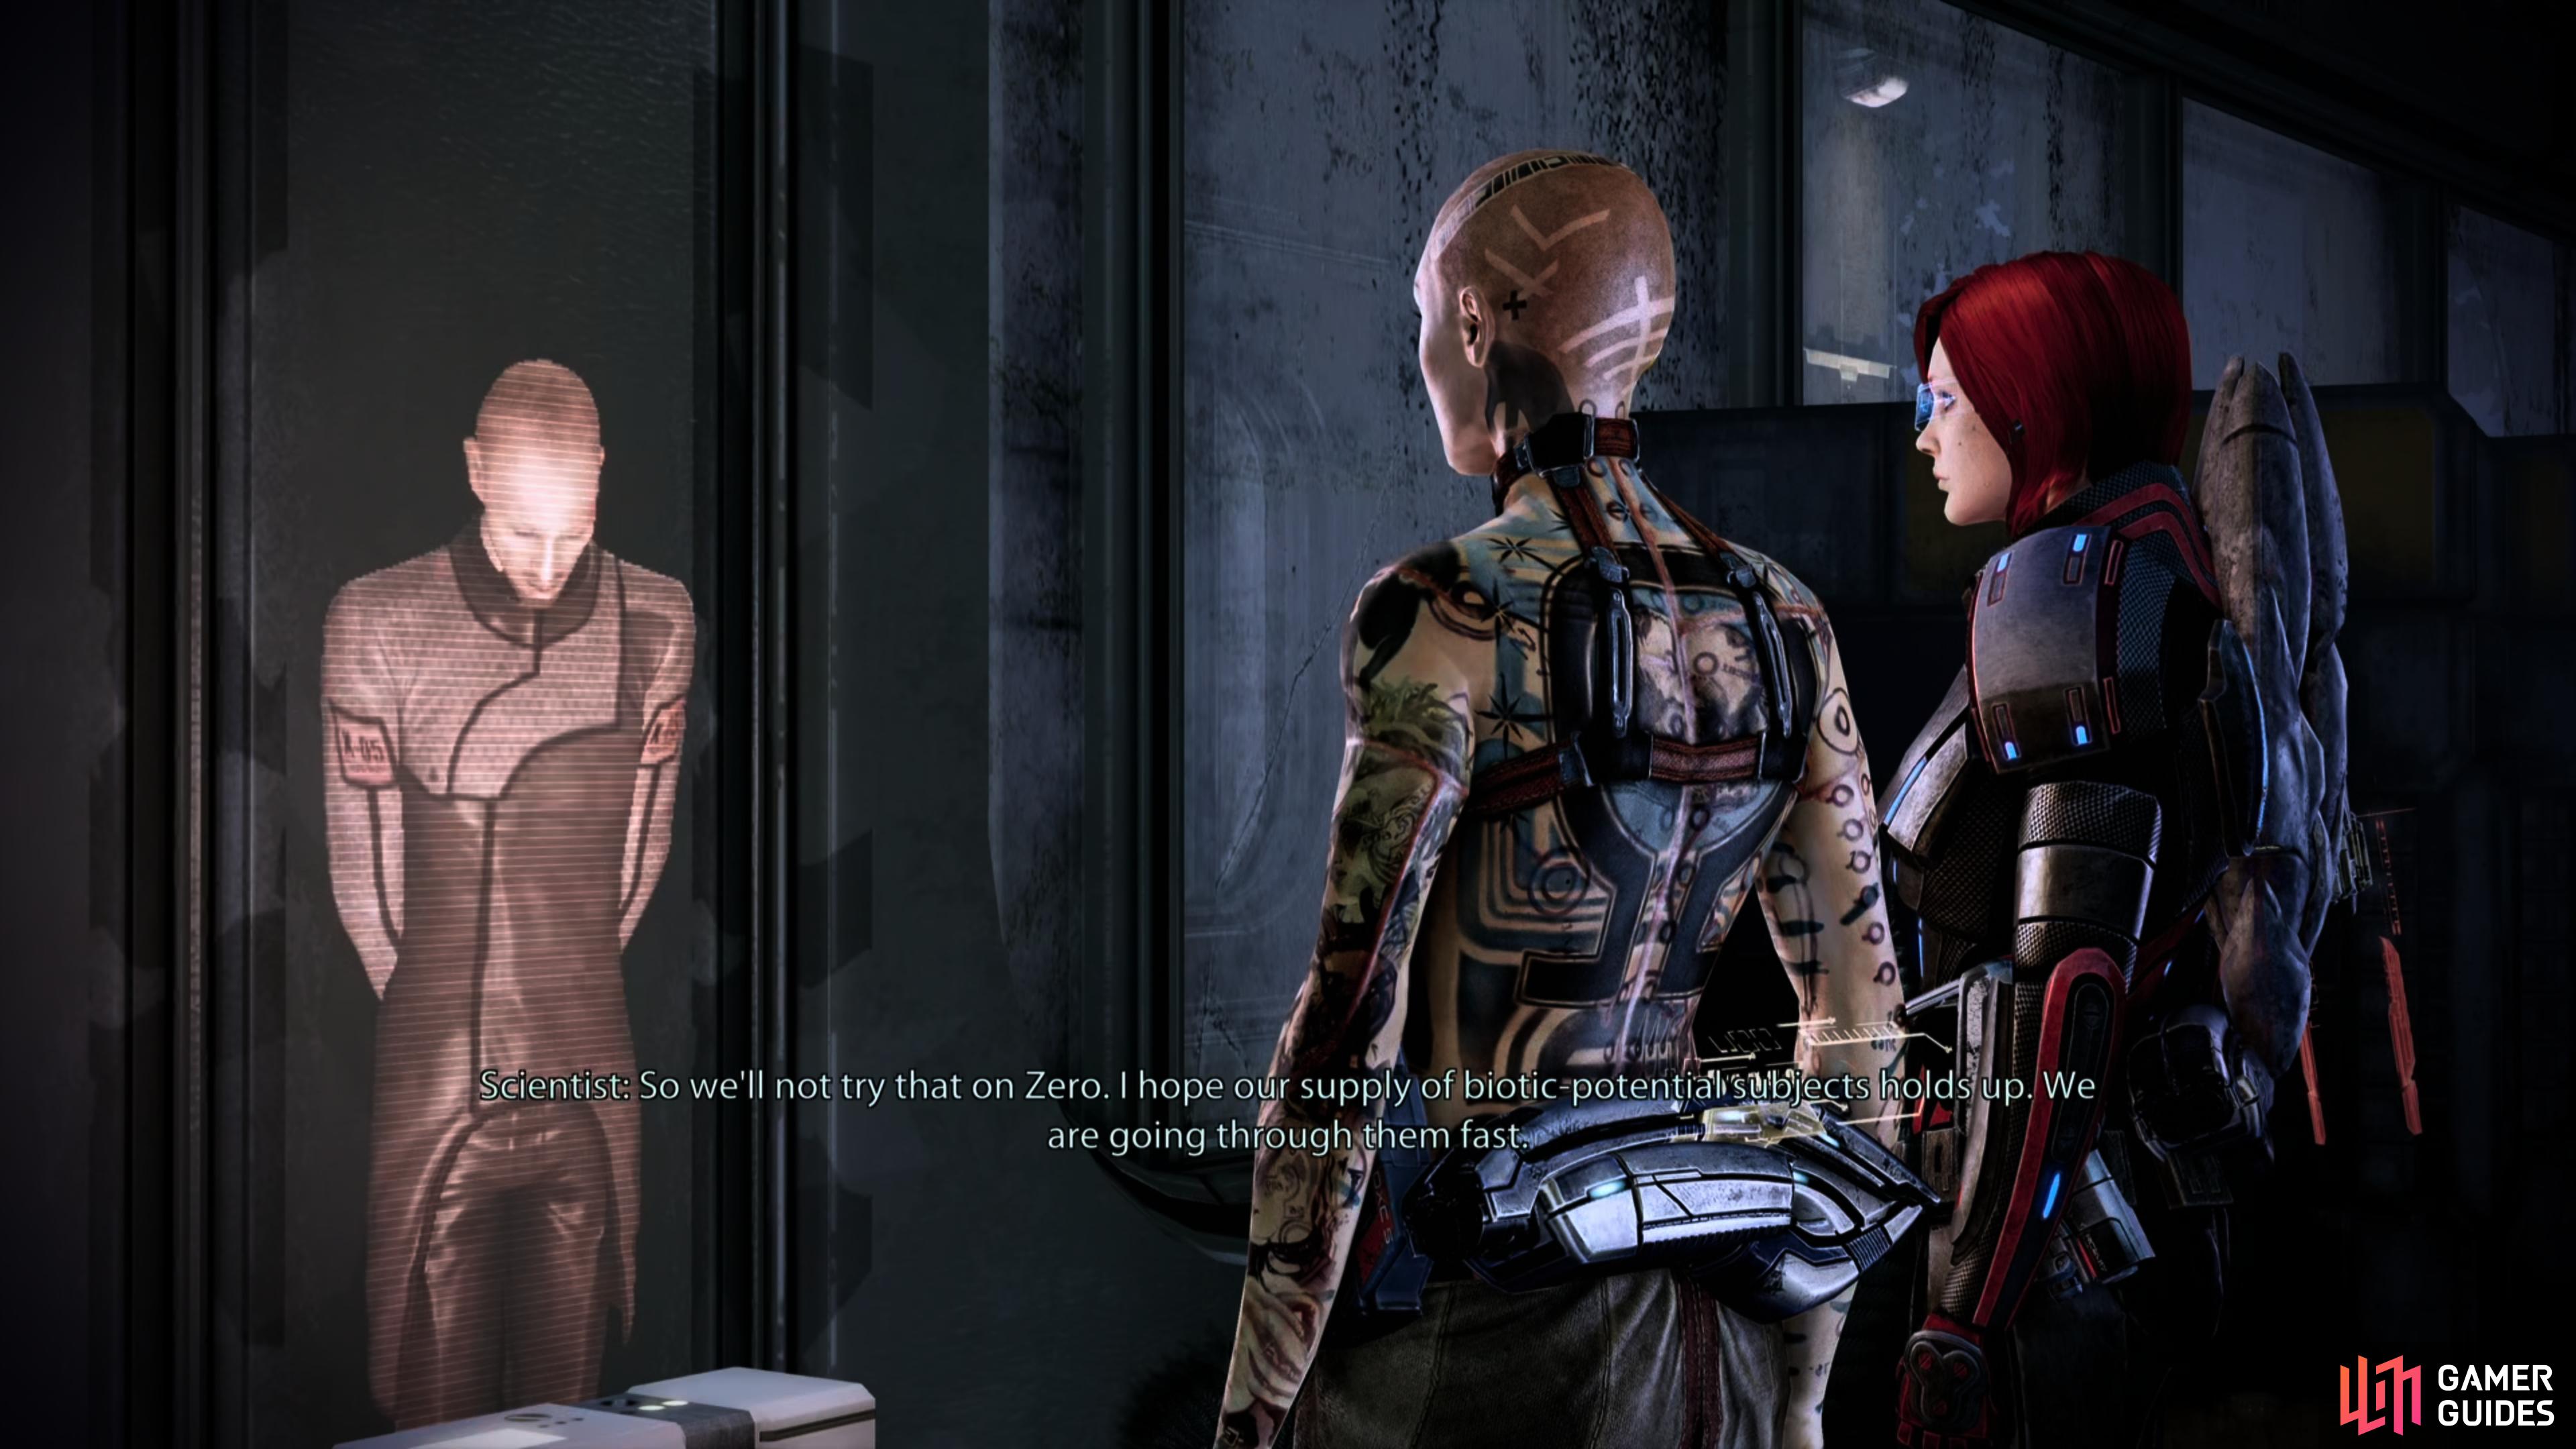 Interact with a console to activate a holo-recording that reveals Jack's past isn't quite how she remembered it…